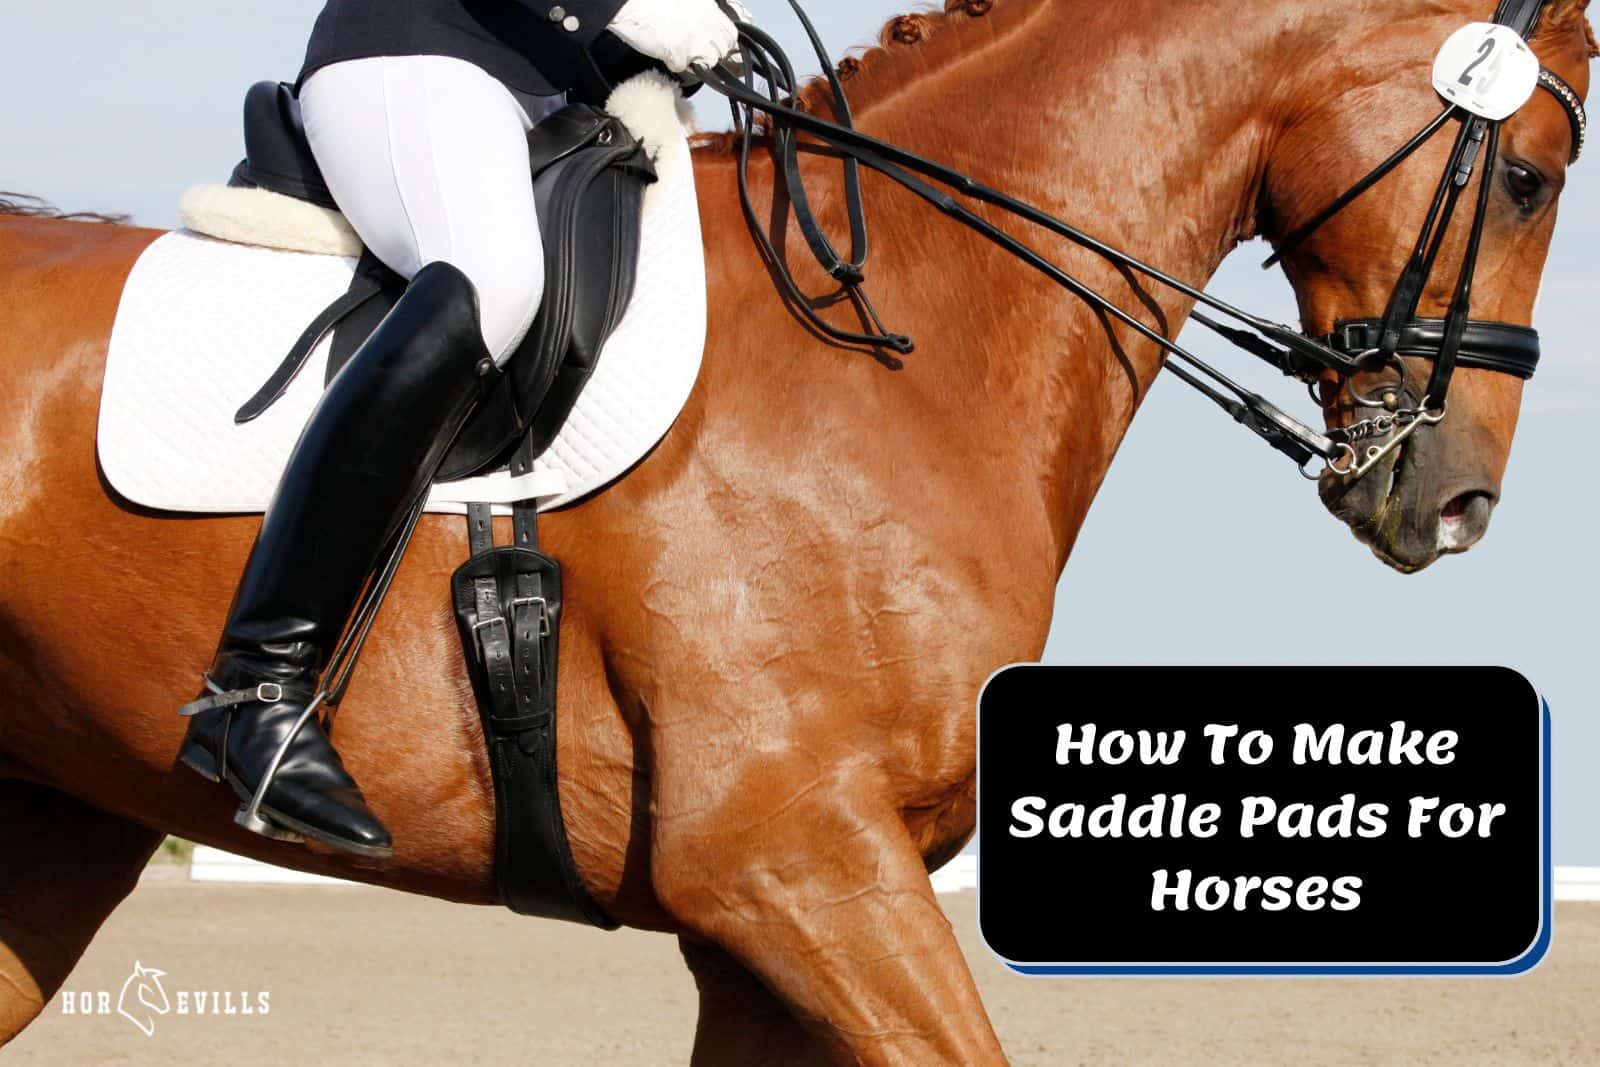 lady riding a horse with white saddle pad but how to make saddle pads for horses at home?